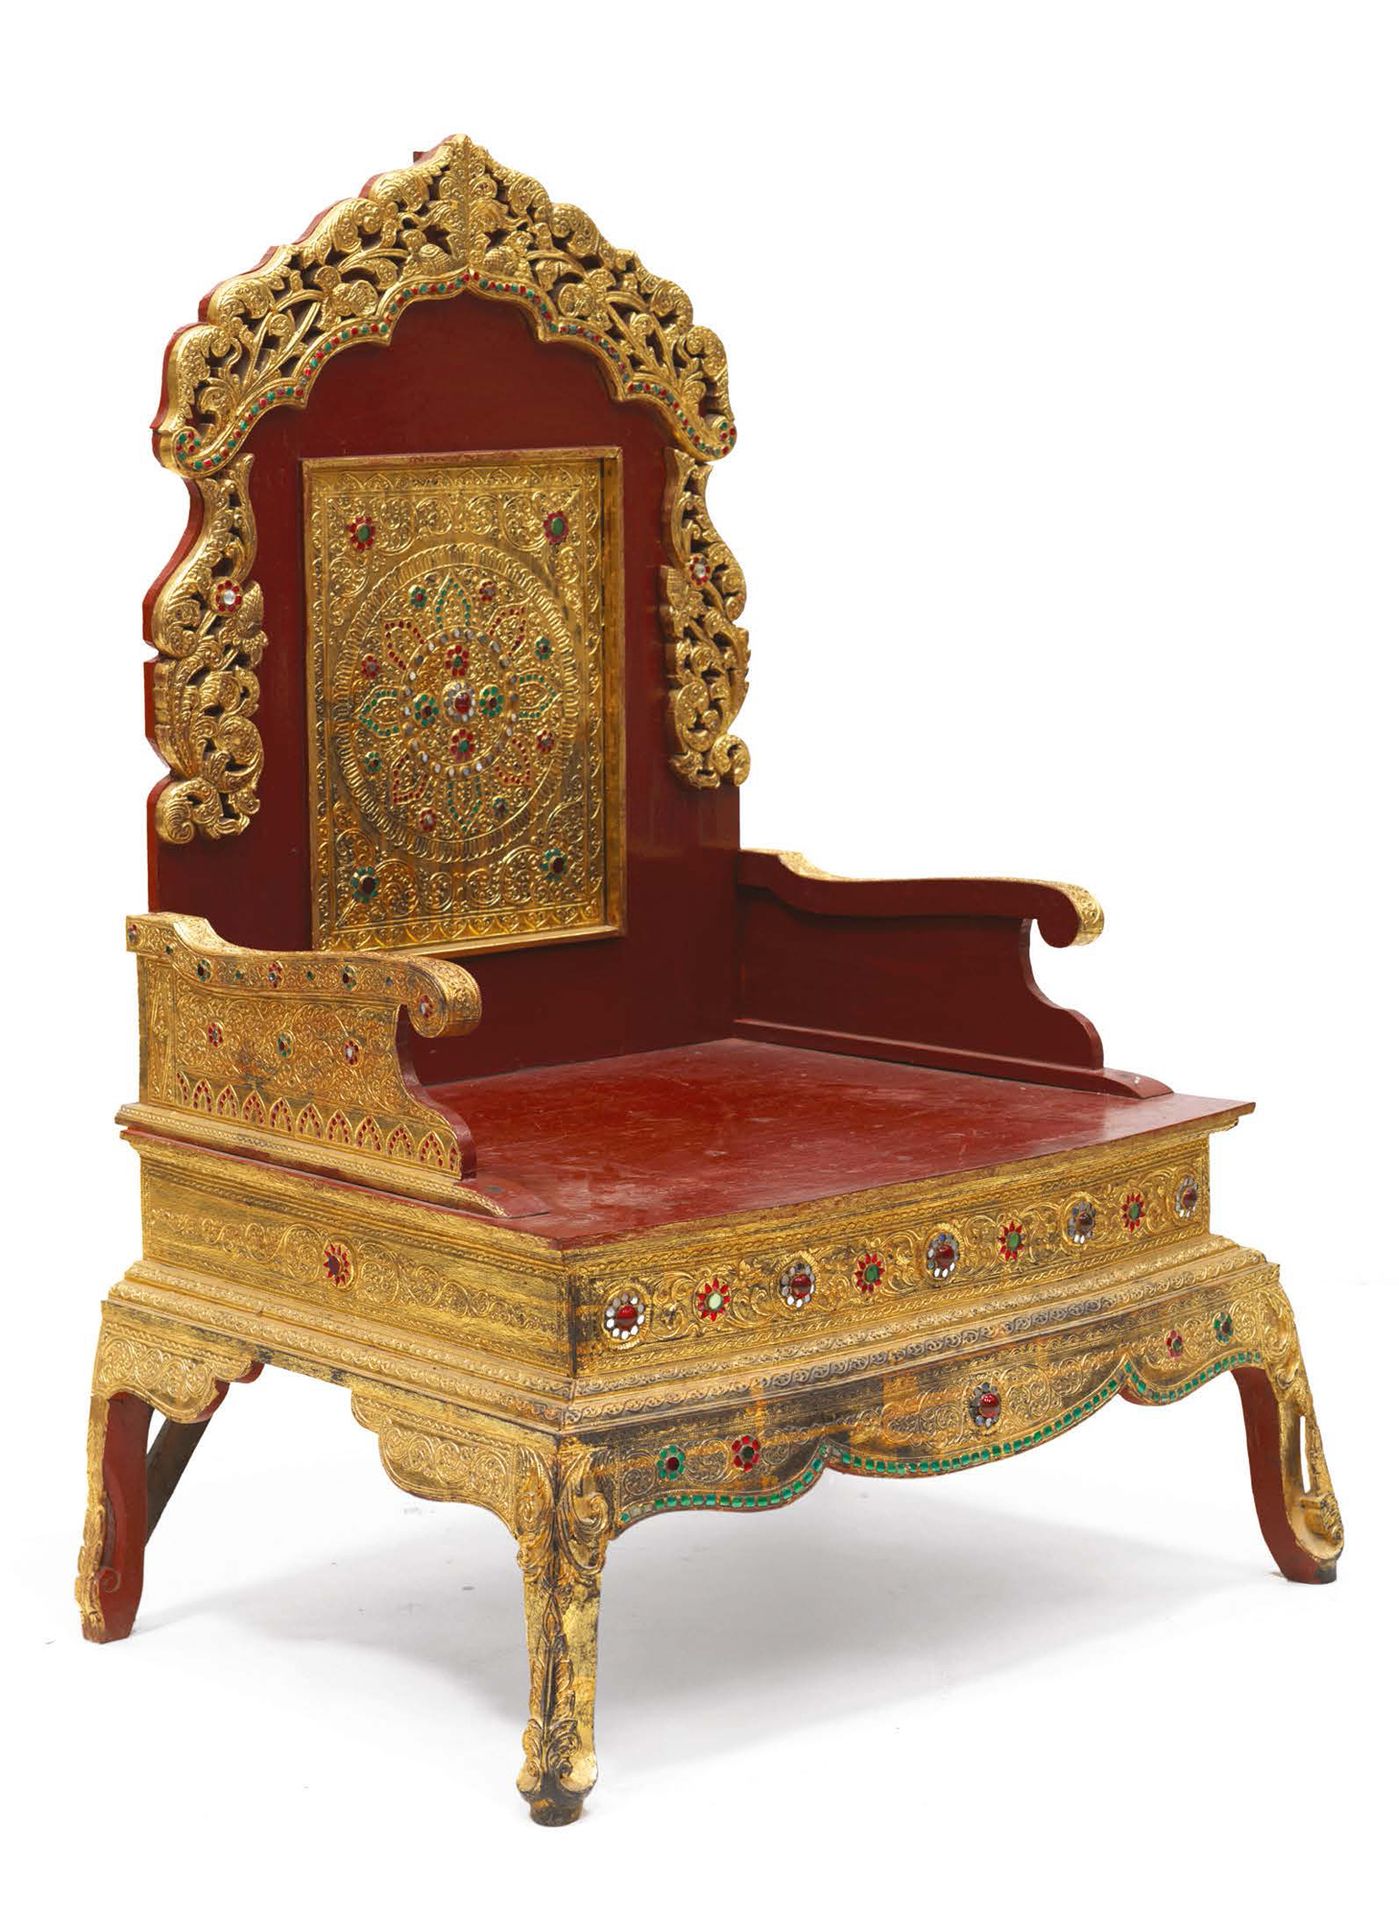 Null THRONE. Polychrome lacquered wood, gold, coloured glass paste inlays, mirro&hellip;